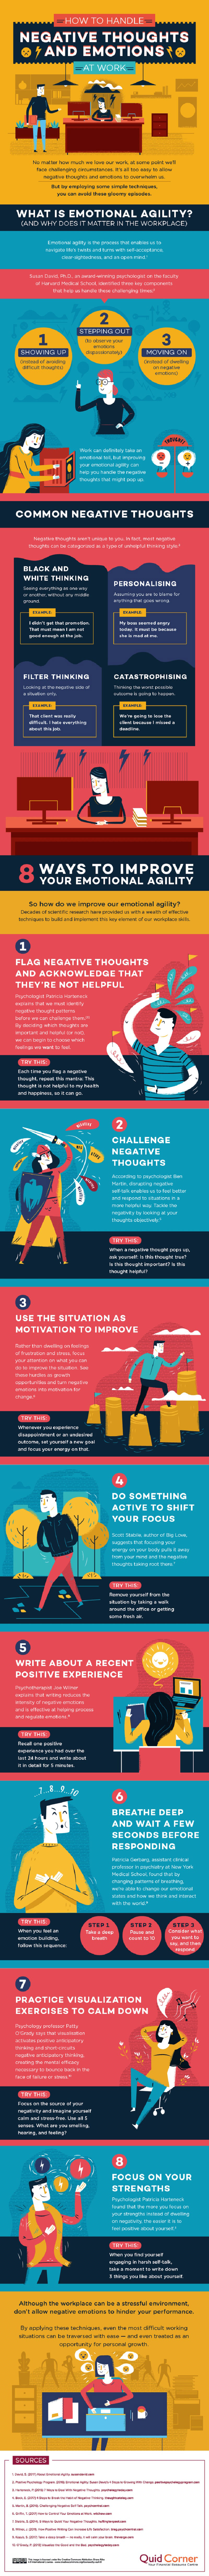 How To Deal With Negative Vibes At Work [Infographic]